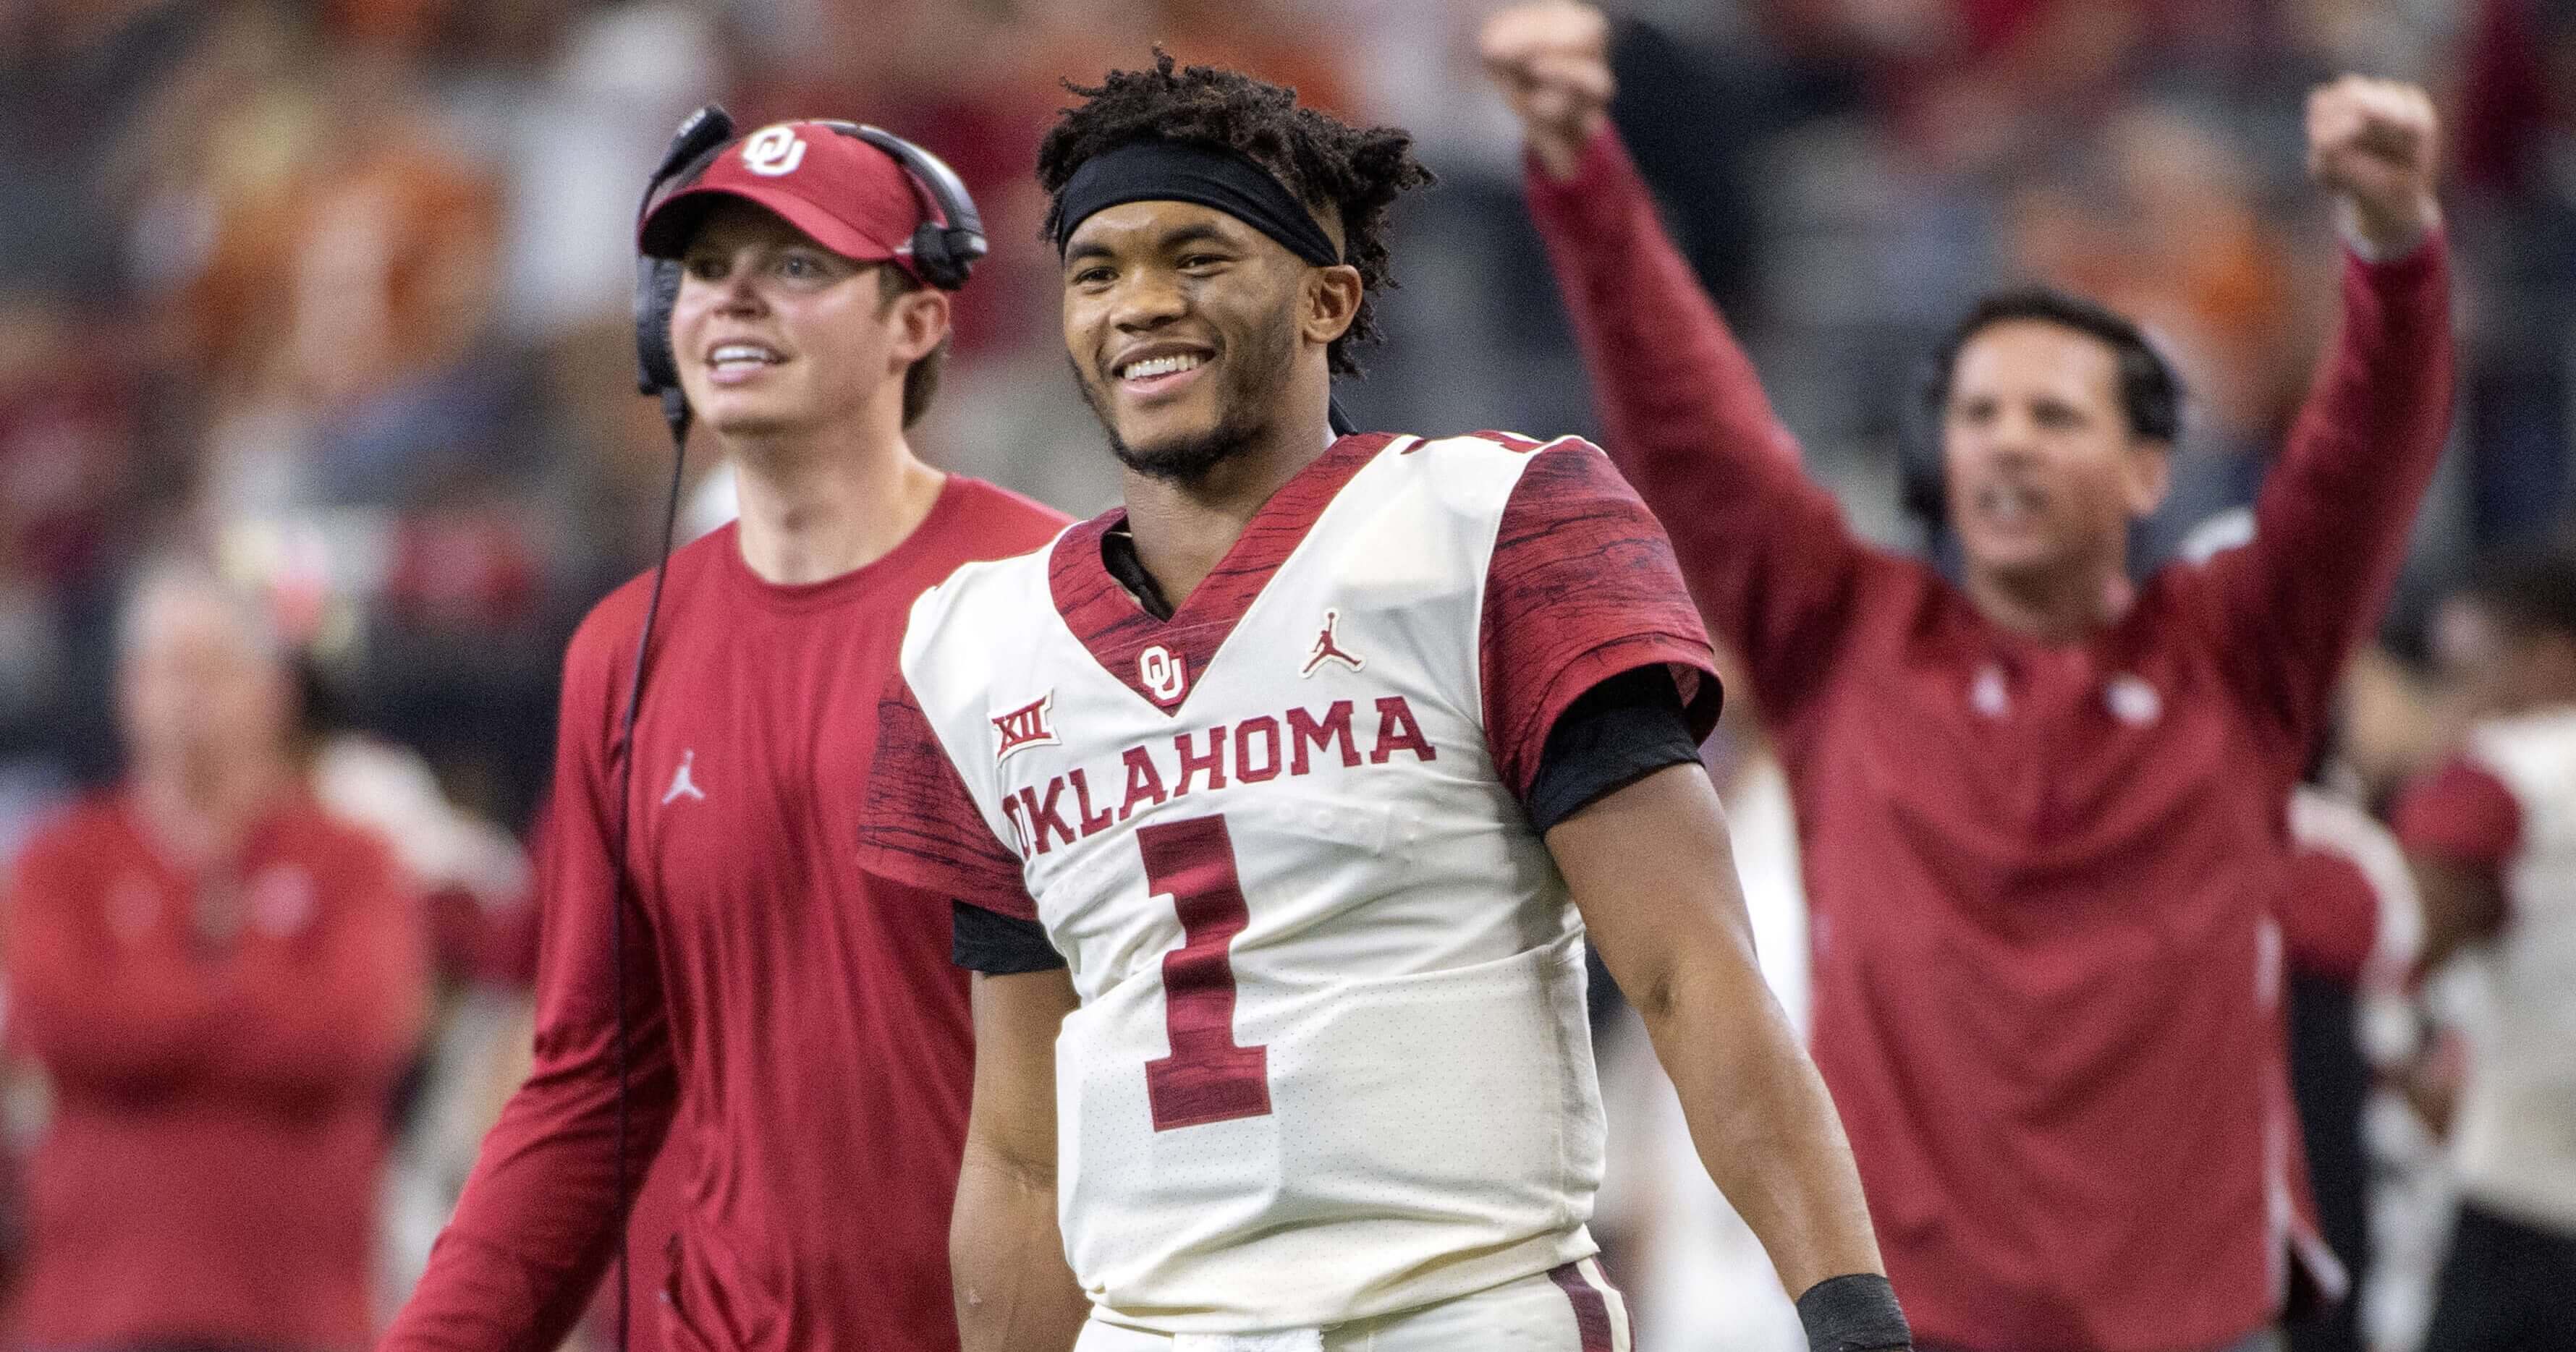 Oklahoma quarterback Kyler Murray celebrates on the sidelines after throwing a touchdown pass against Texas in the Big 12 championship game. Murray is one of a record number of college football players bypassing their remaining years of eligibility to enter the NFL draft.